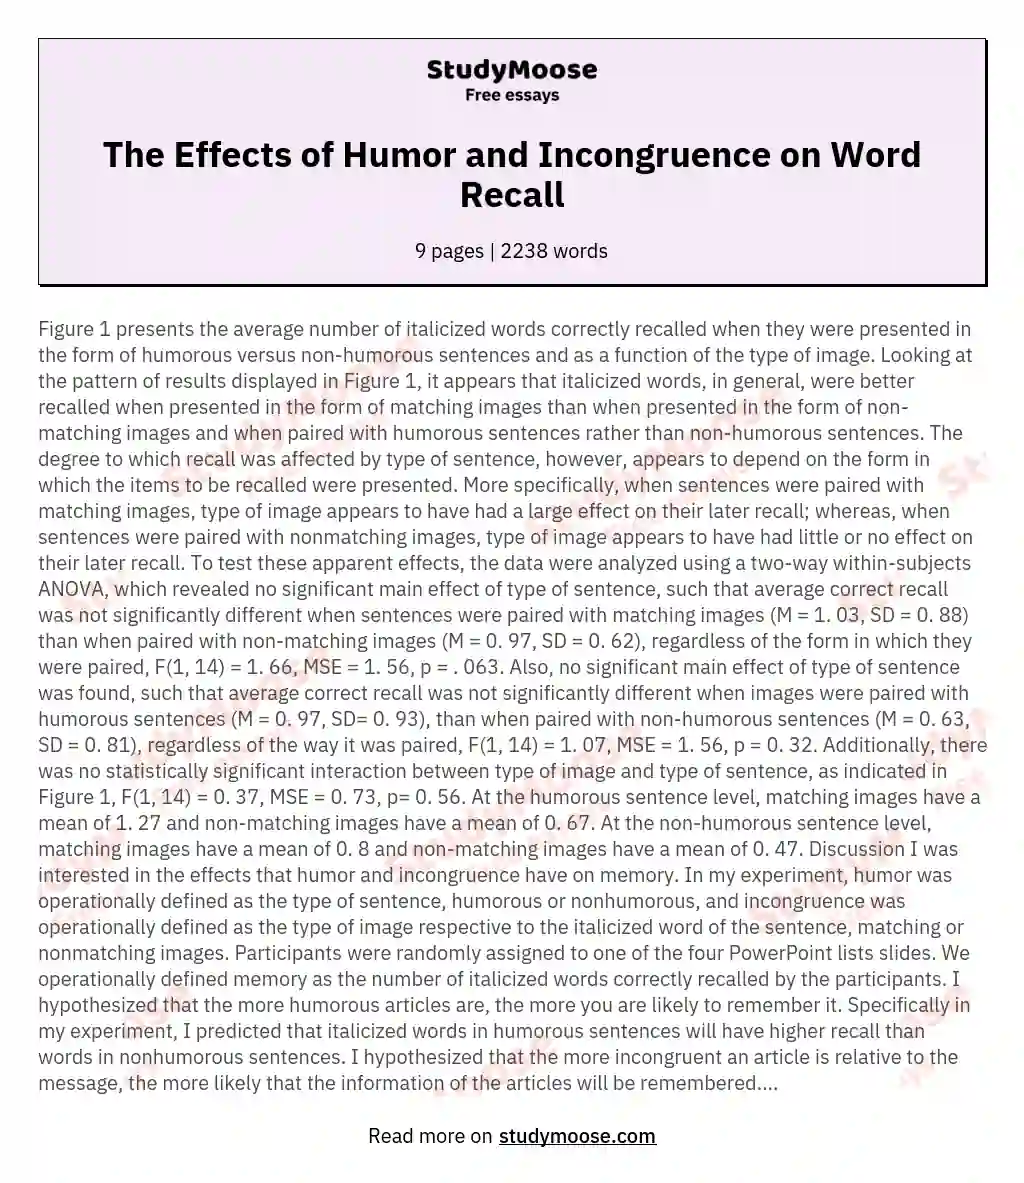 The Effects of Humor and Incongruence on Word Recall essay